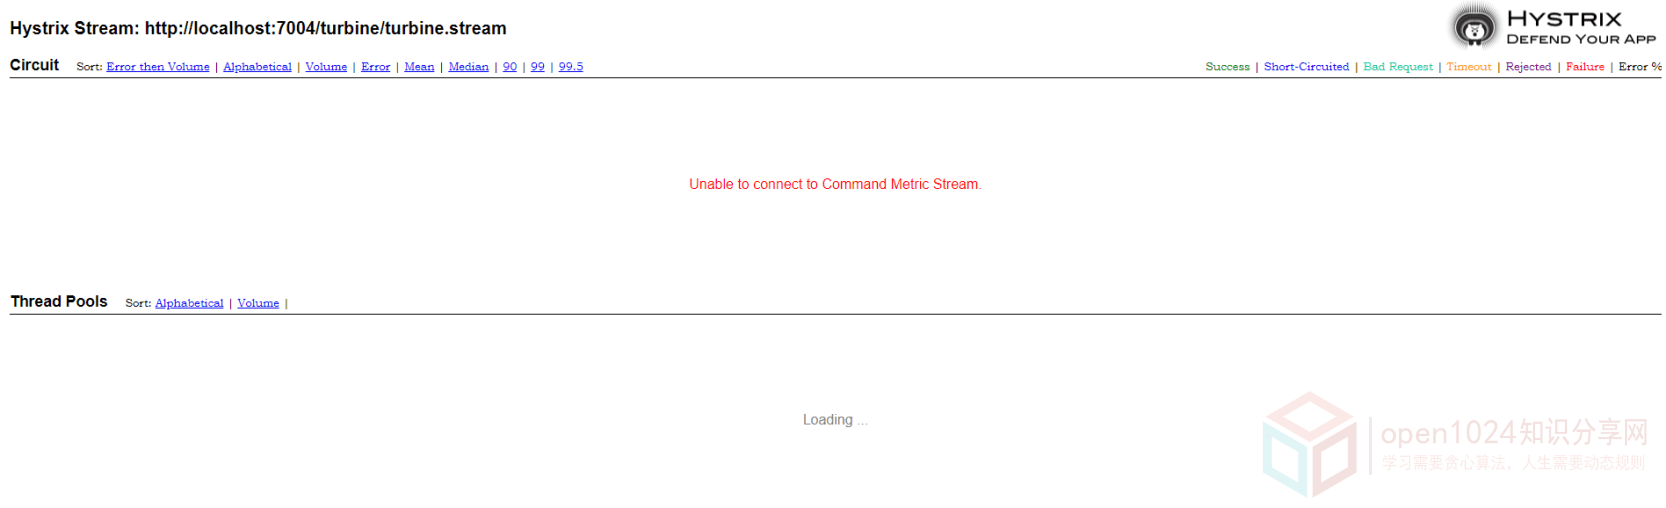 hystrix dashboard Unable to connect to Command Metric Stream解决办法.png